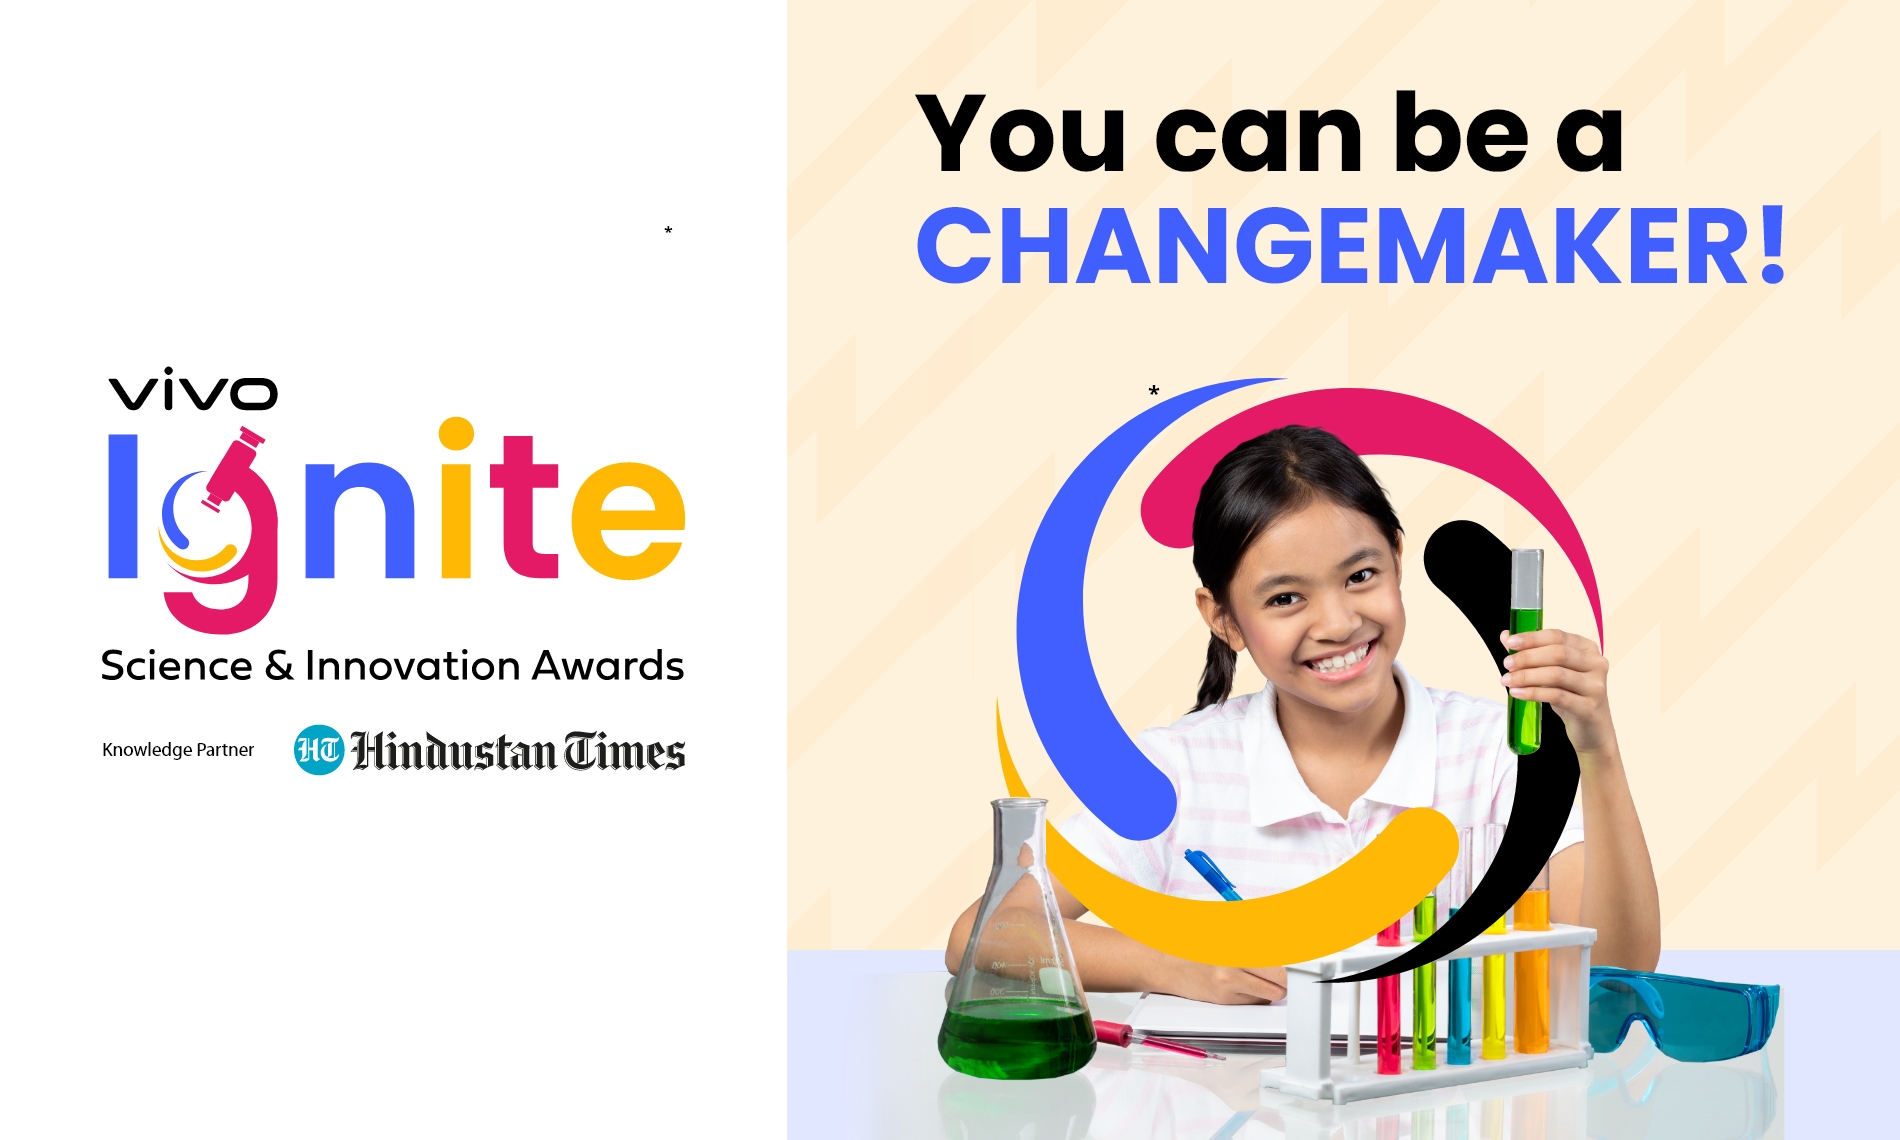 vivo launches vivo Ignite Initiative – provides platform for 8 - 12 grade students to showcase their vision that can bring change to society